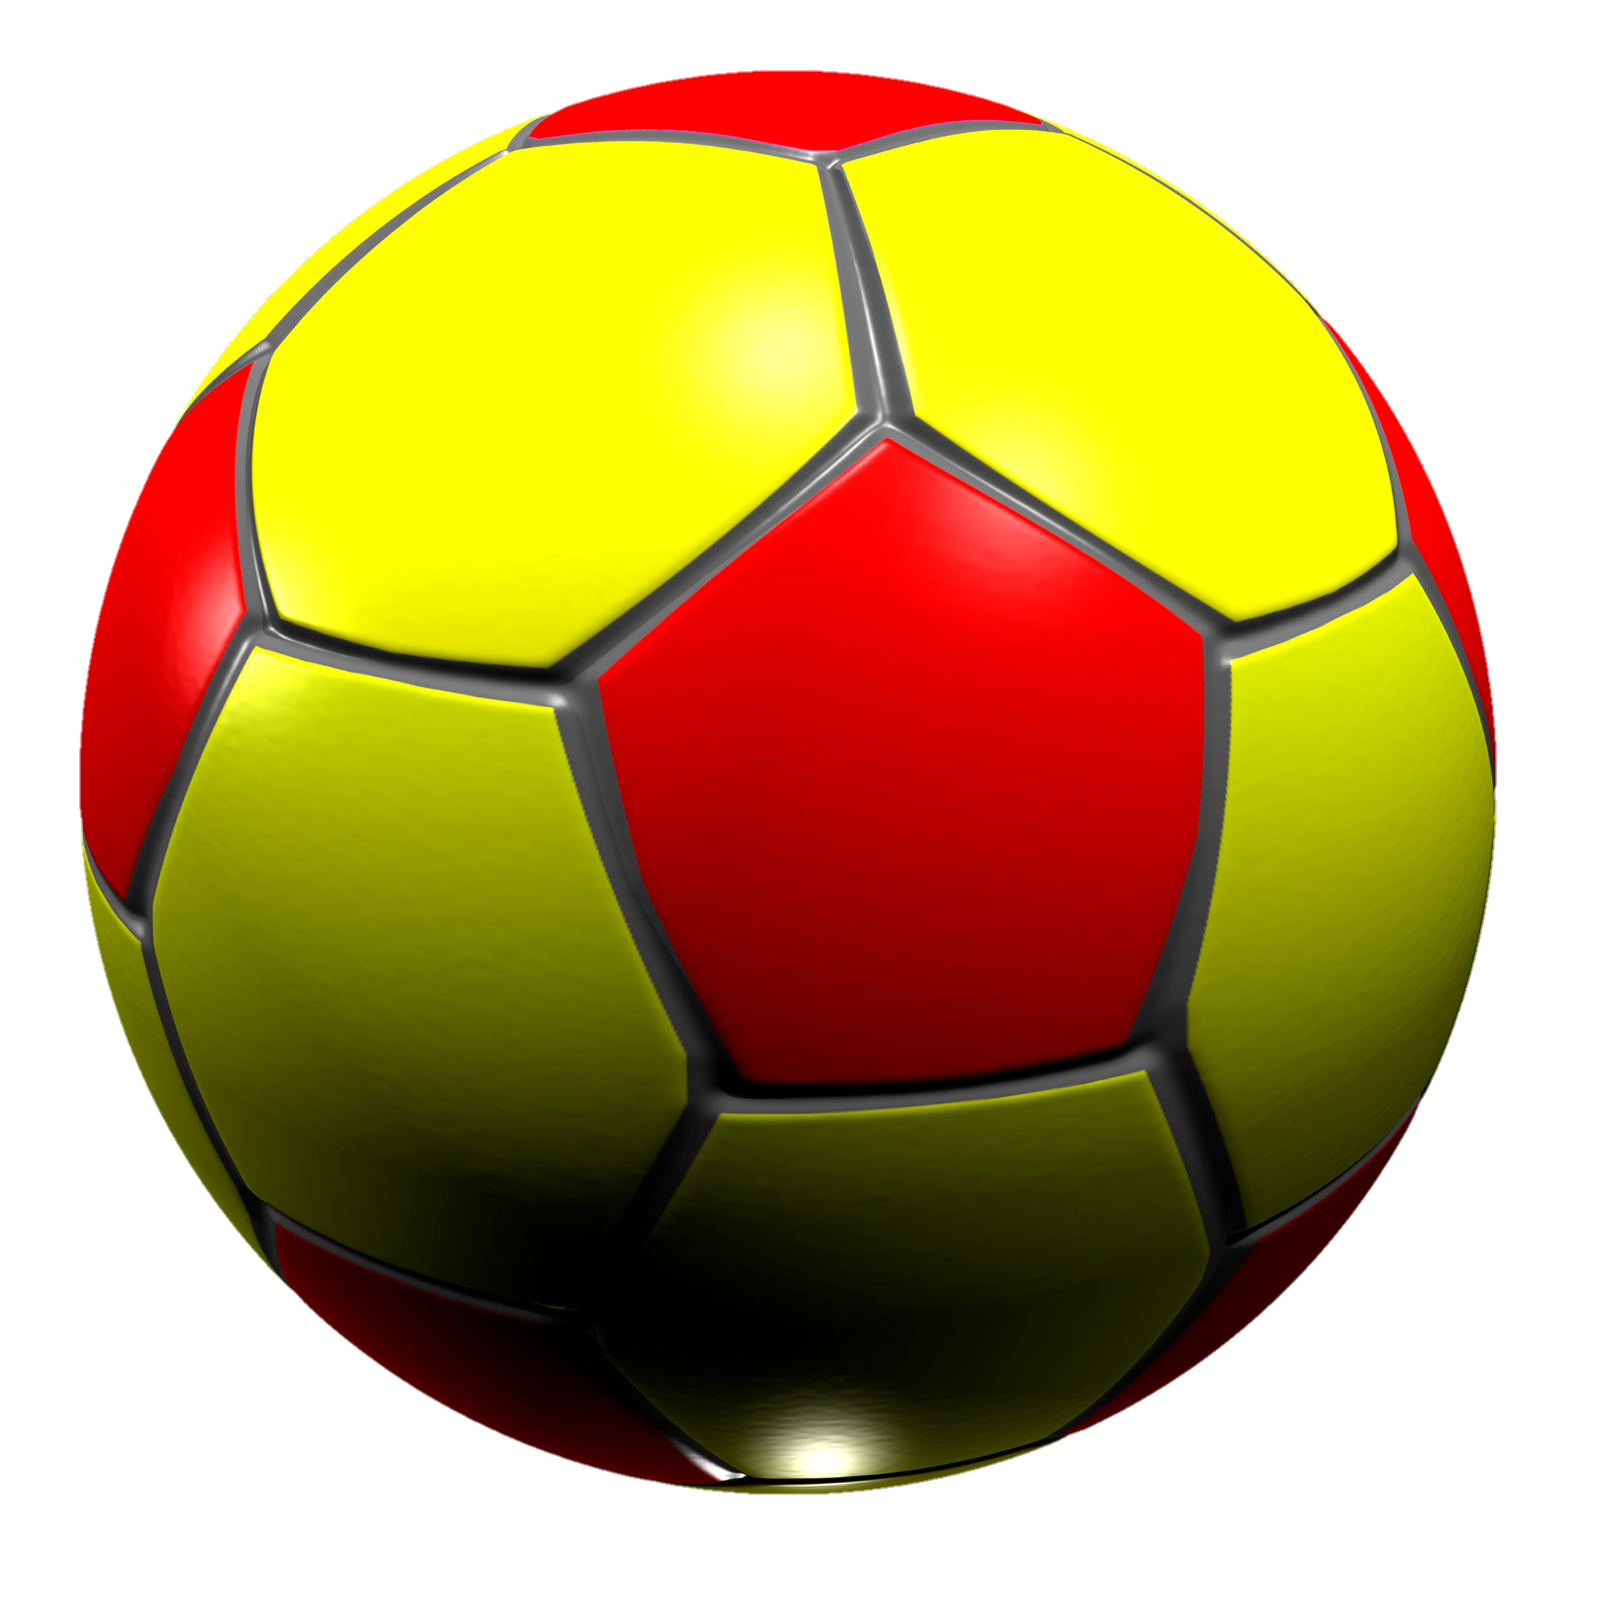 football-png-image-from-pngfre-23